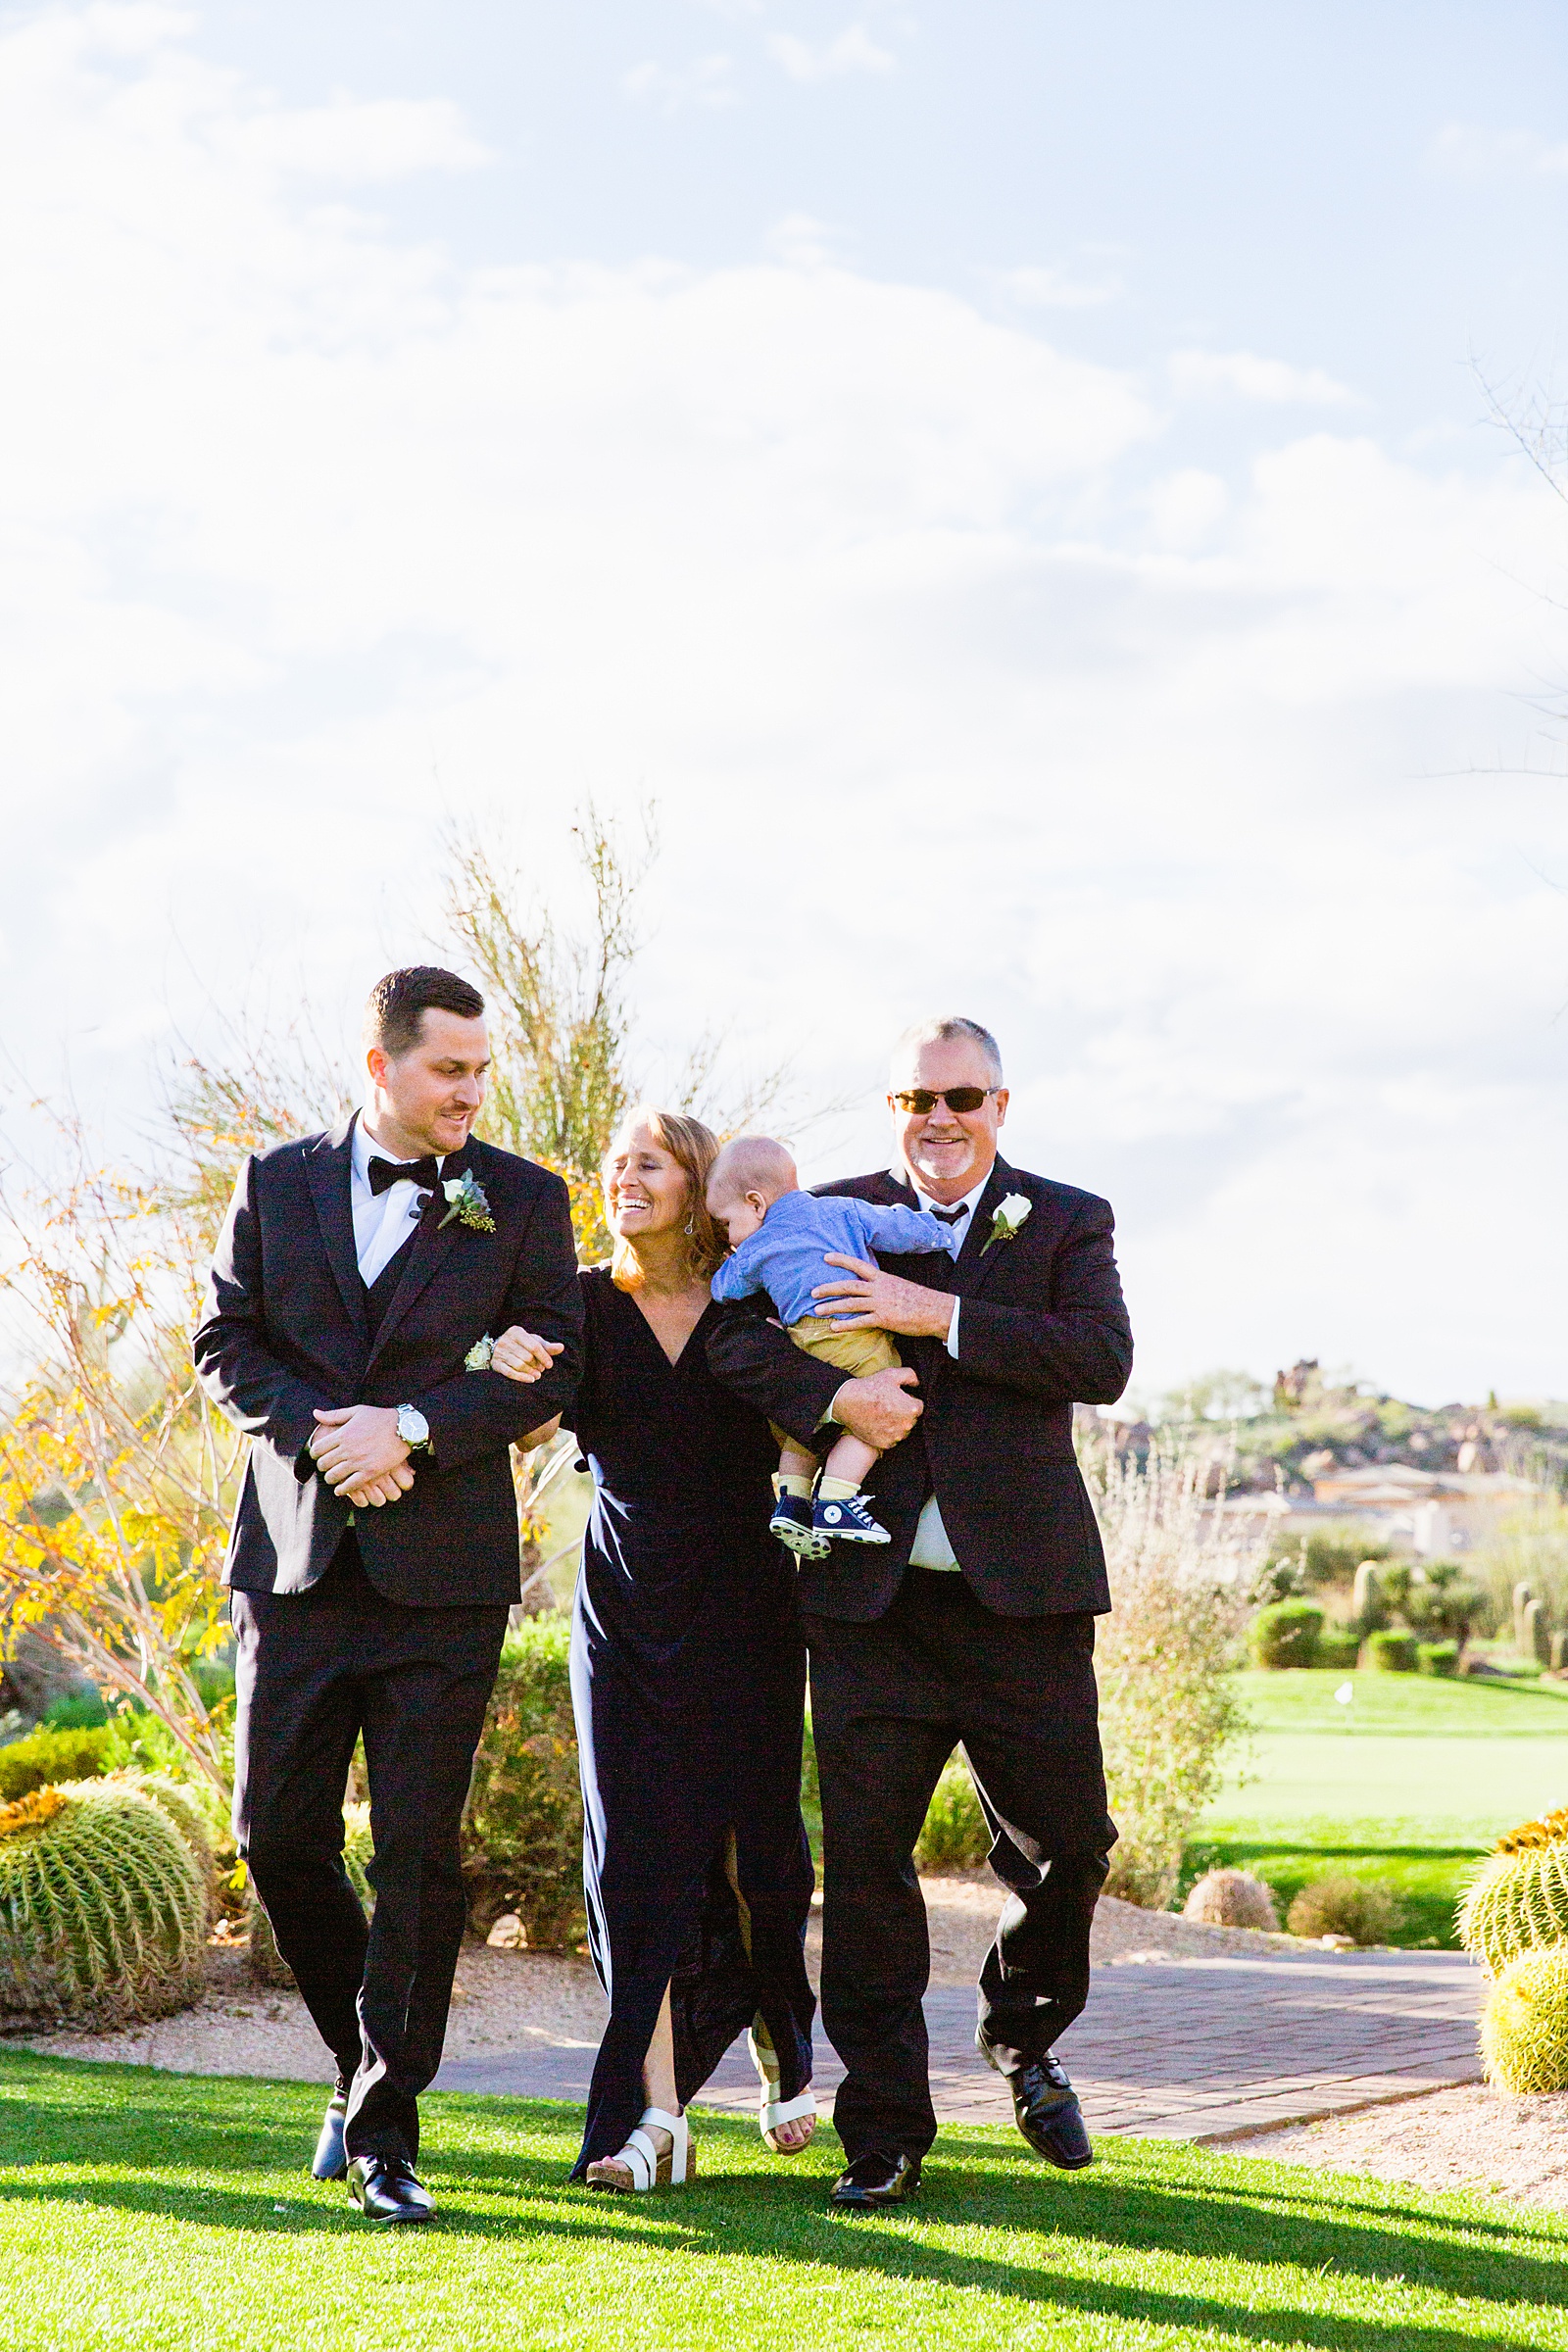 Groom walking down aisle during Troon North wedding ceremony by Phoenix wedding photographer PMA Photography.